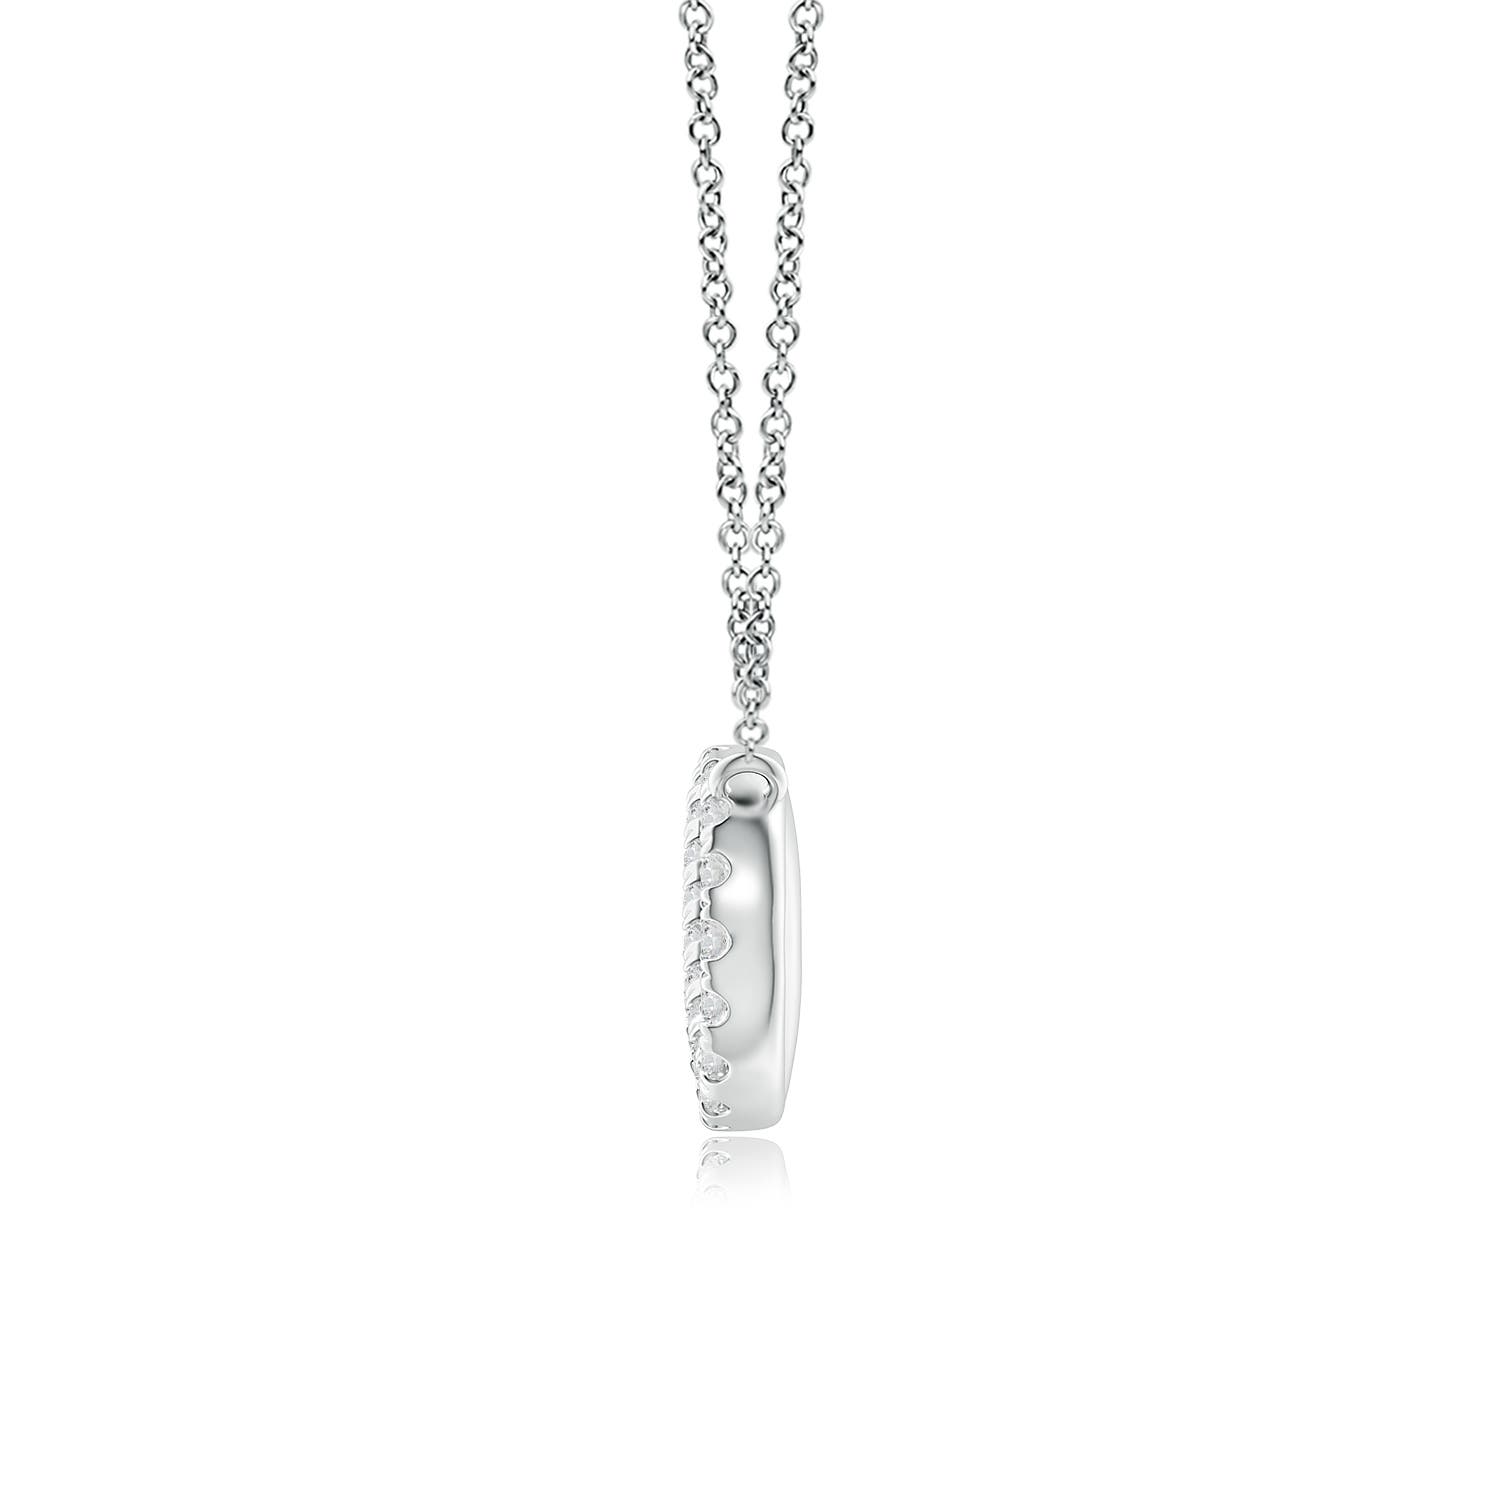 H, SI2 / 0.31 CT / 14 KT White Gold